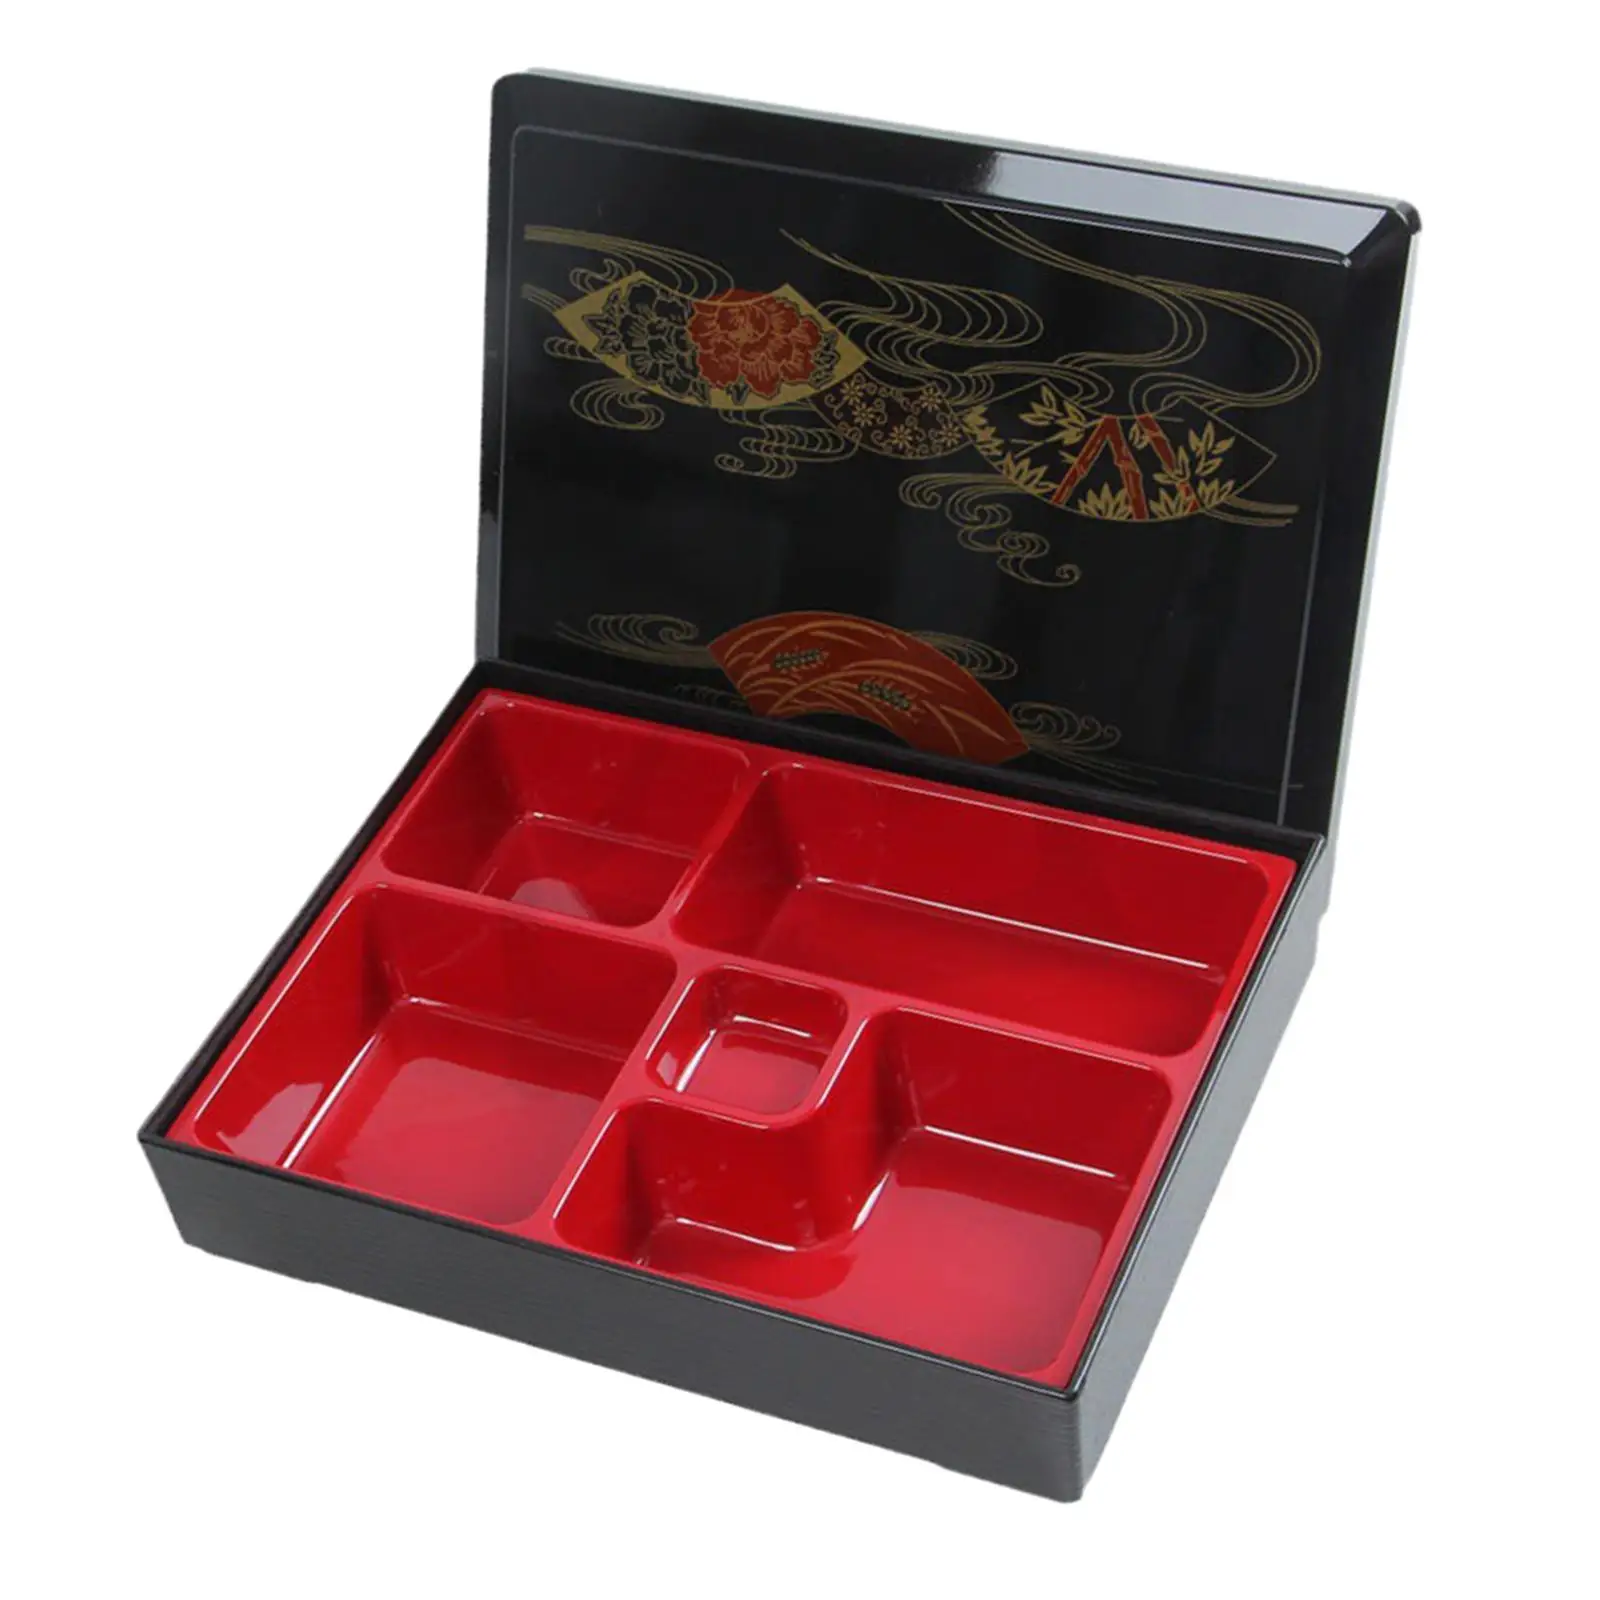 Japanese Bento Box with Lid Lunch Box for Sushi, Rice, Sauce Office Business